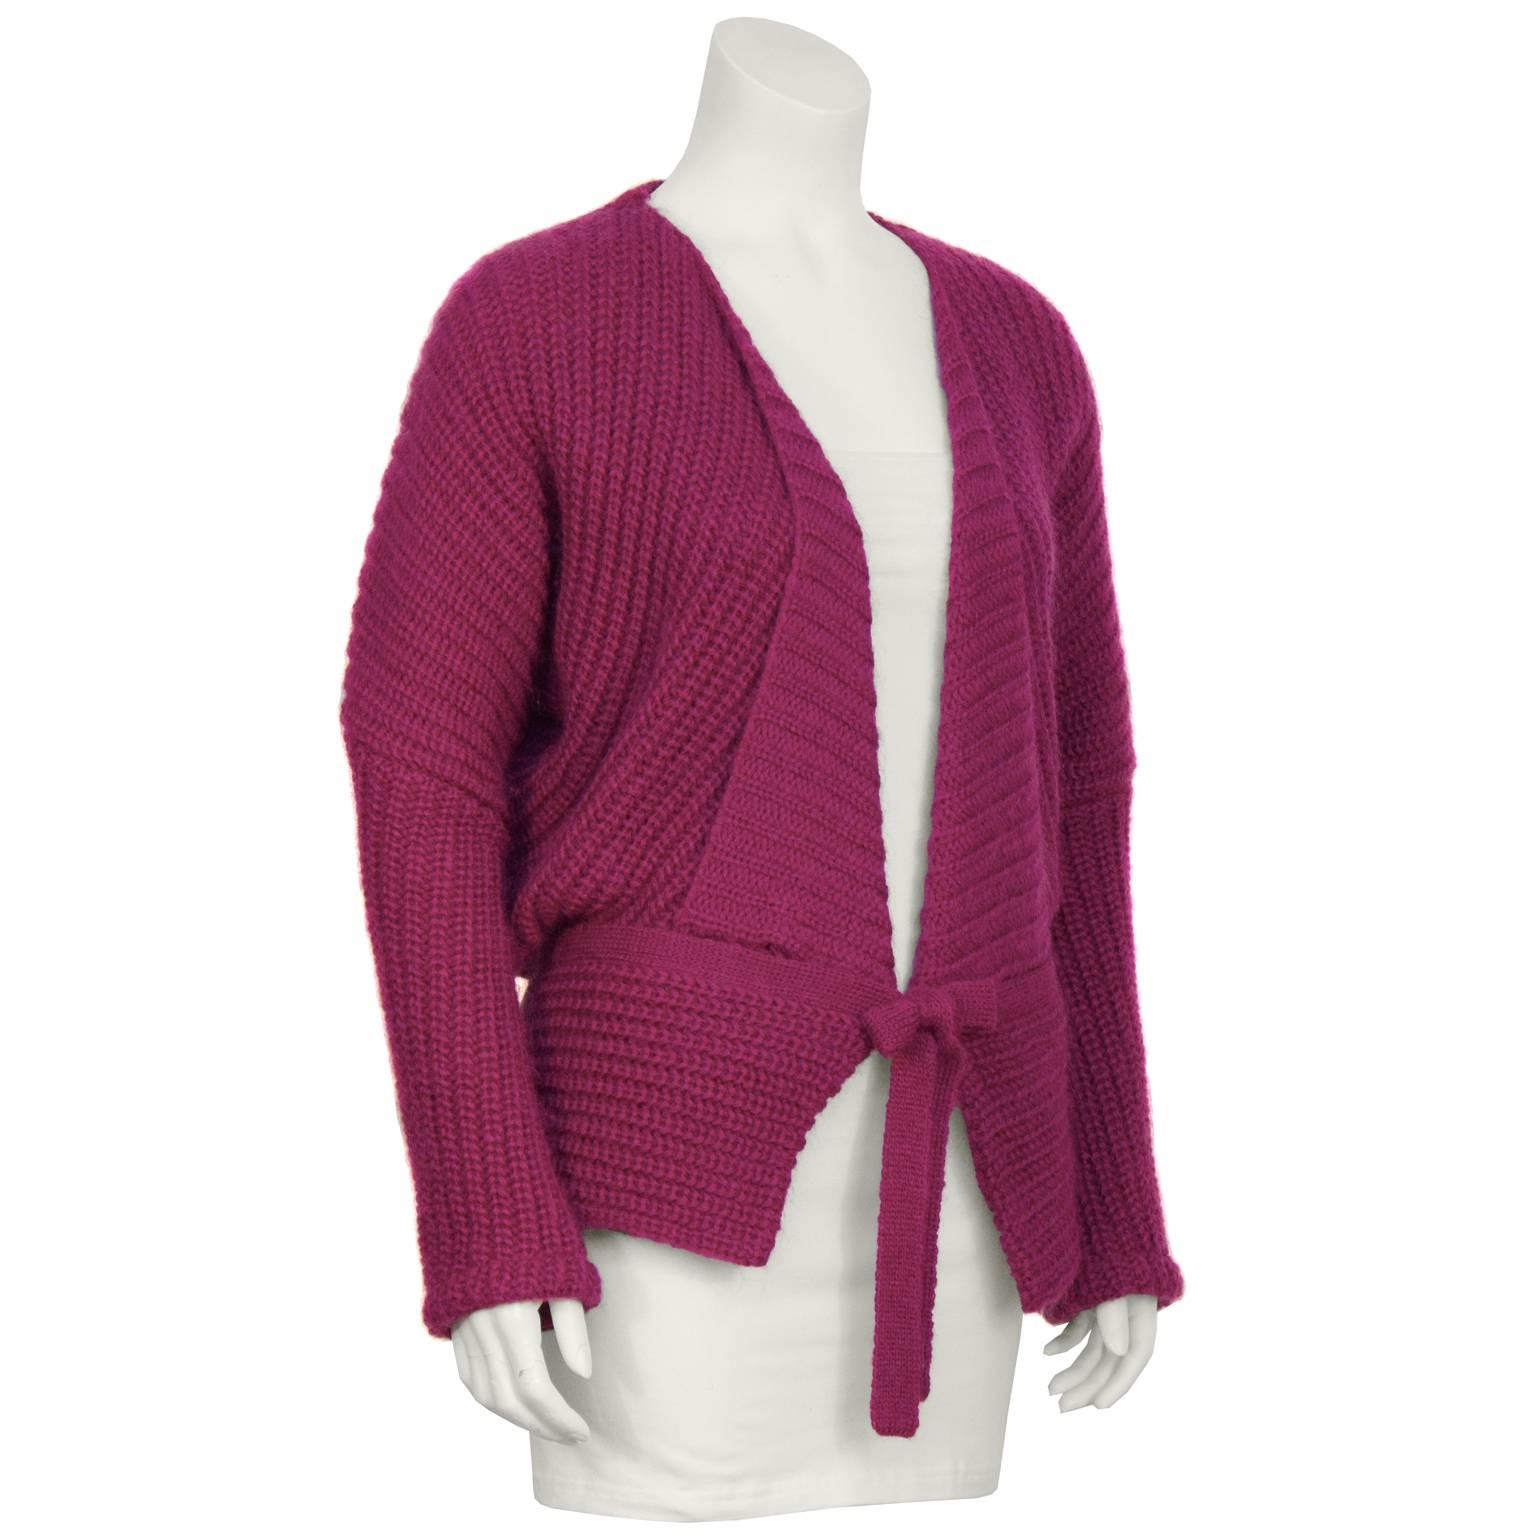 1980's Missoni fuschia wool/nylon oversized shawl style knit sweater with a drop shoulder. The lapel is stitched into place which helps it hold its shape and the sweater comes with an additional matching belt/scarf piece. In excellent condition.